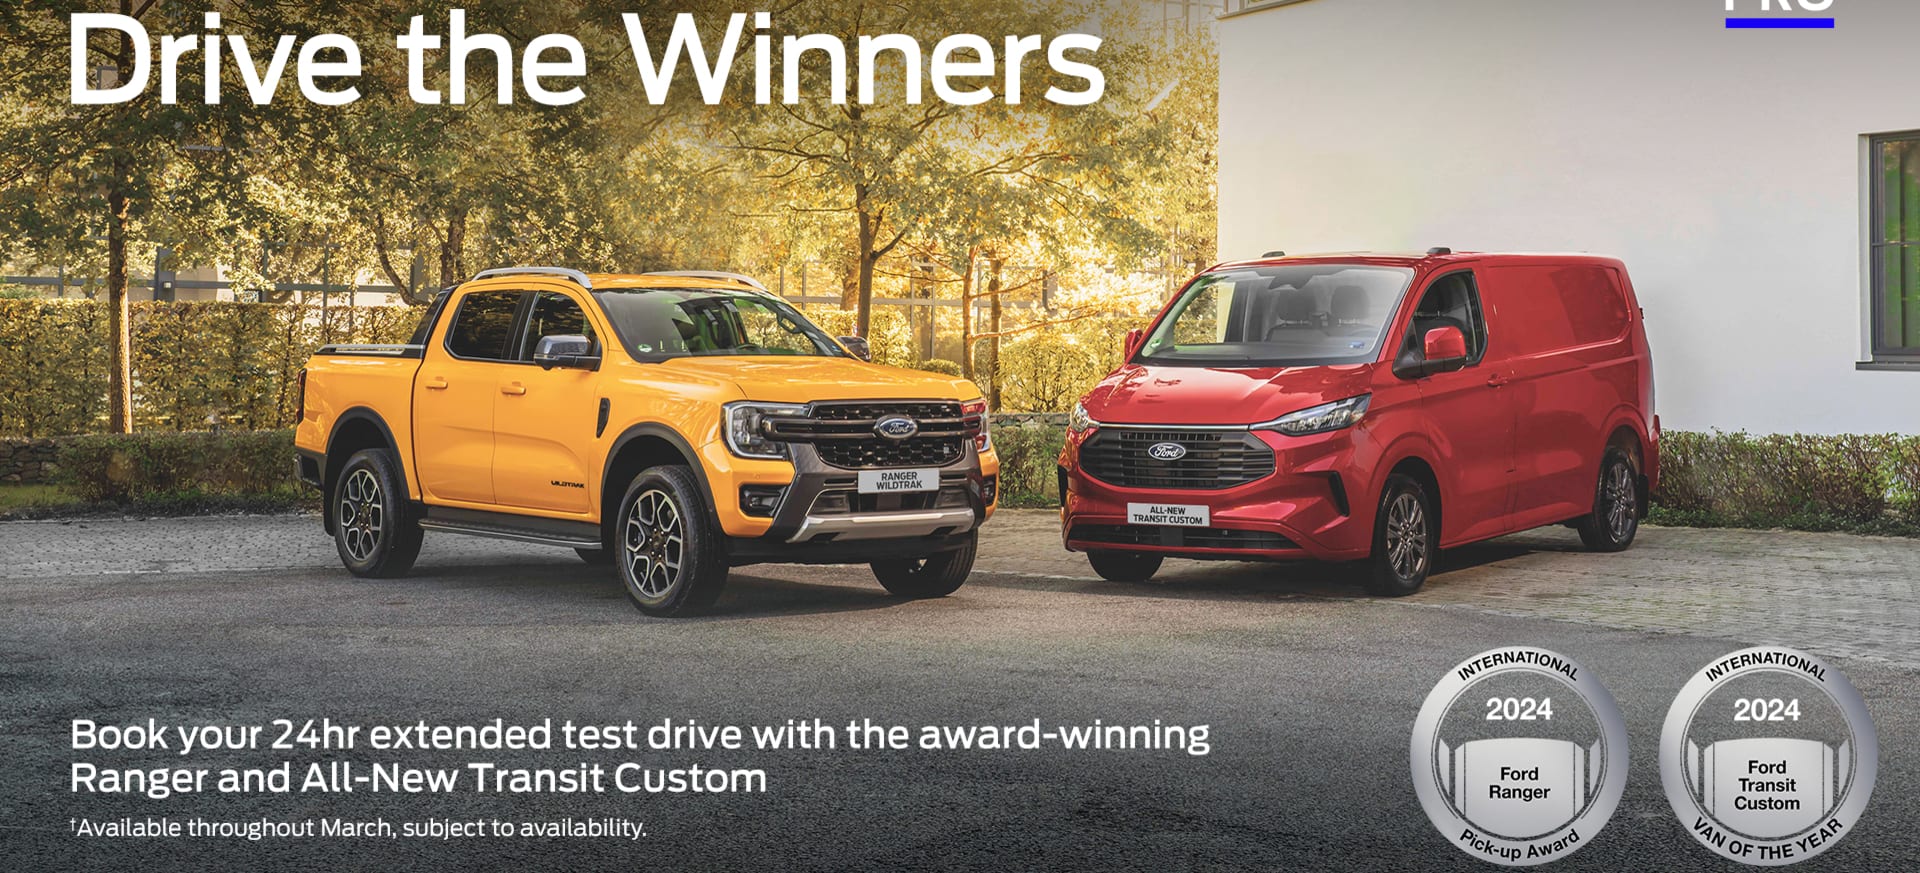 Drive The Winners Extended 24Hr Test Drive 